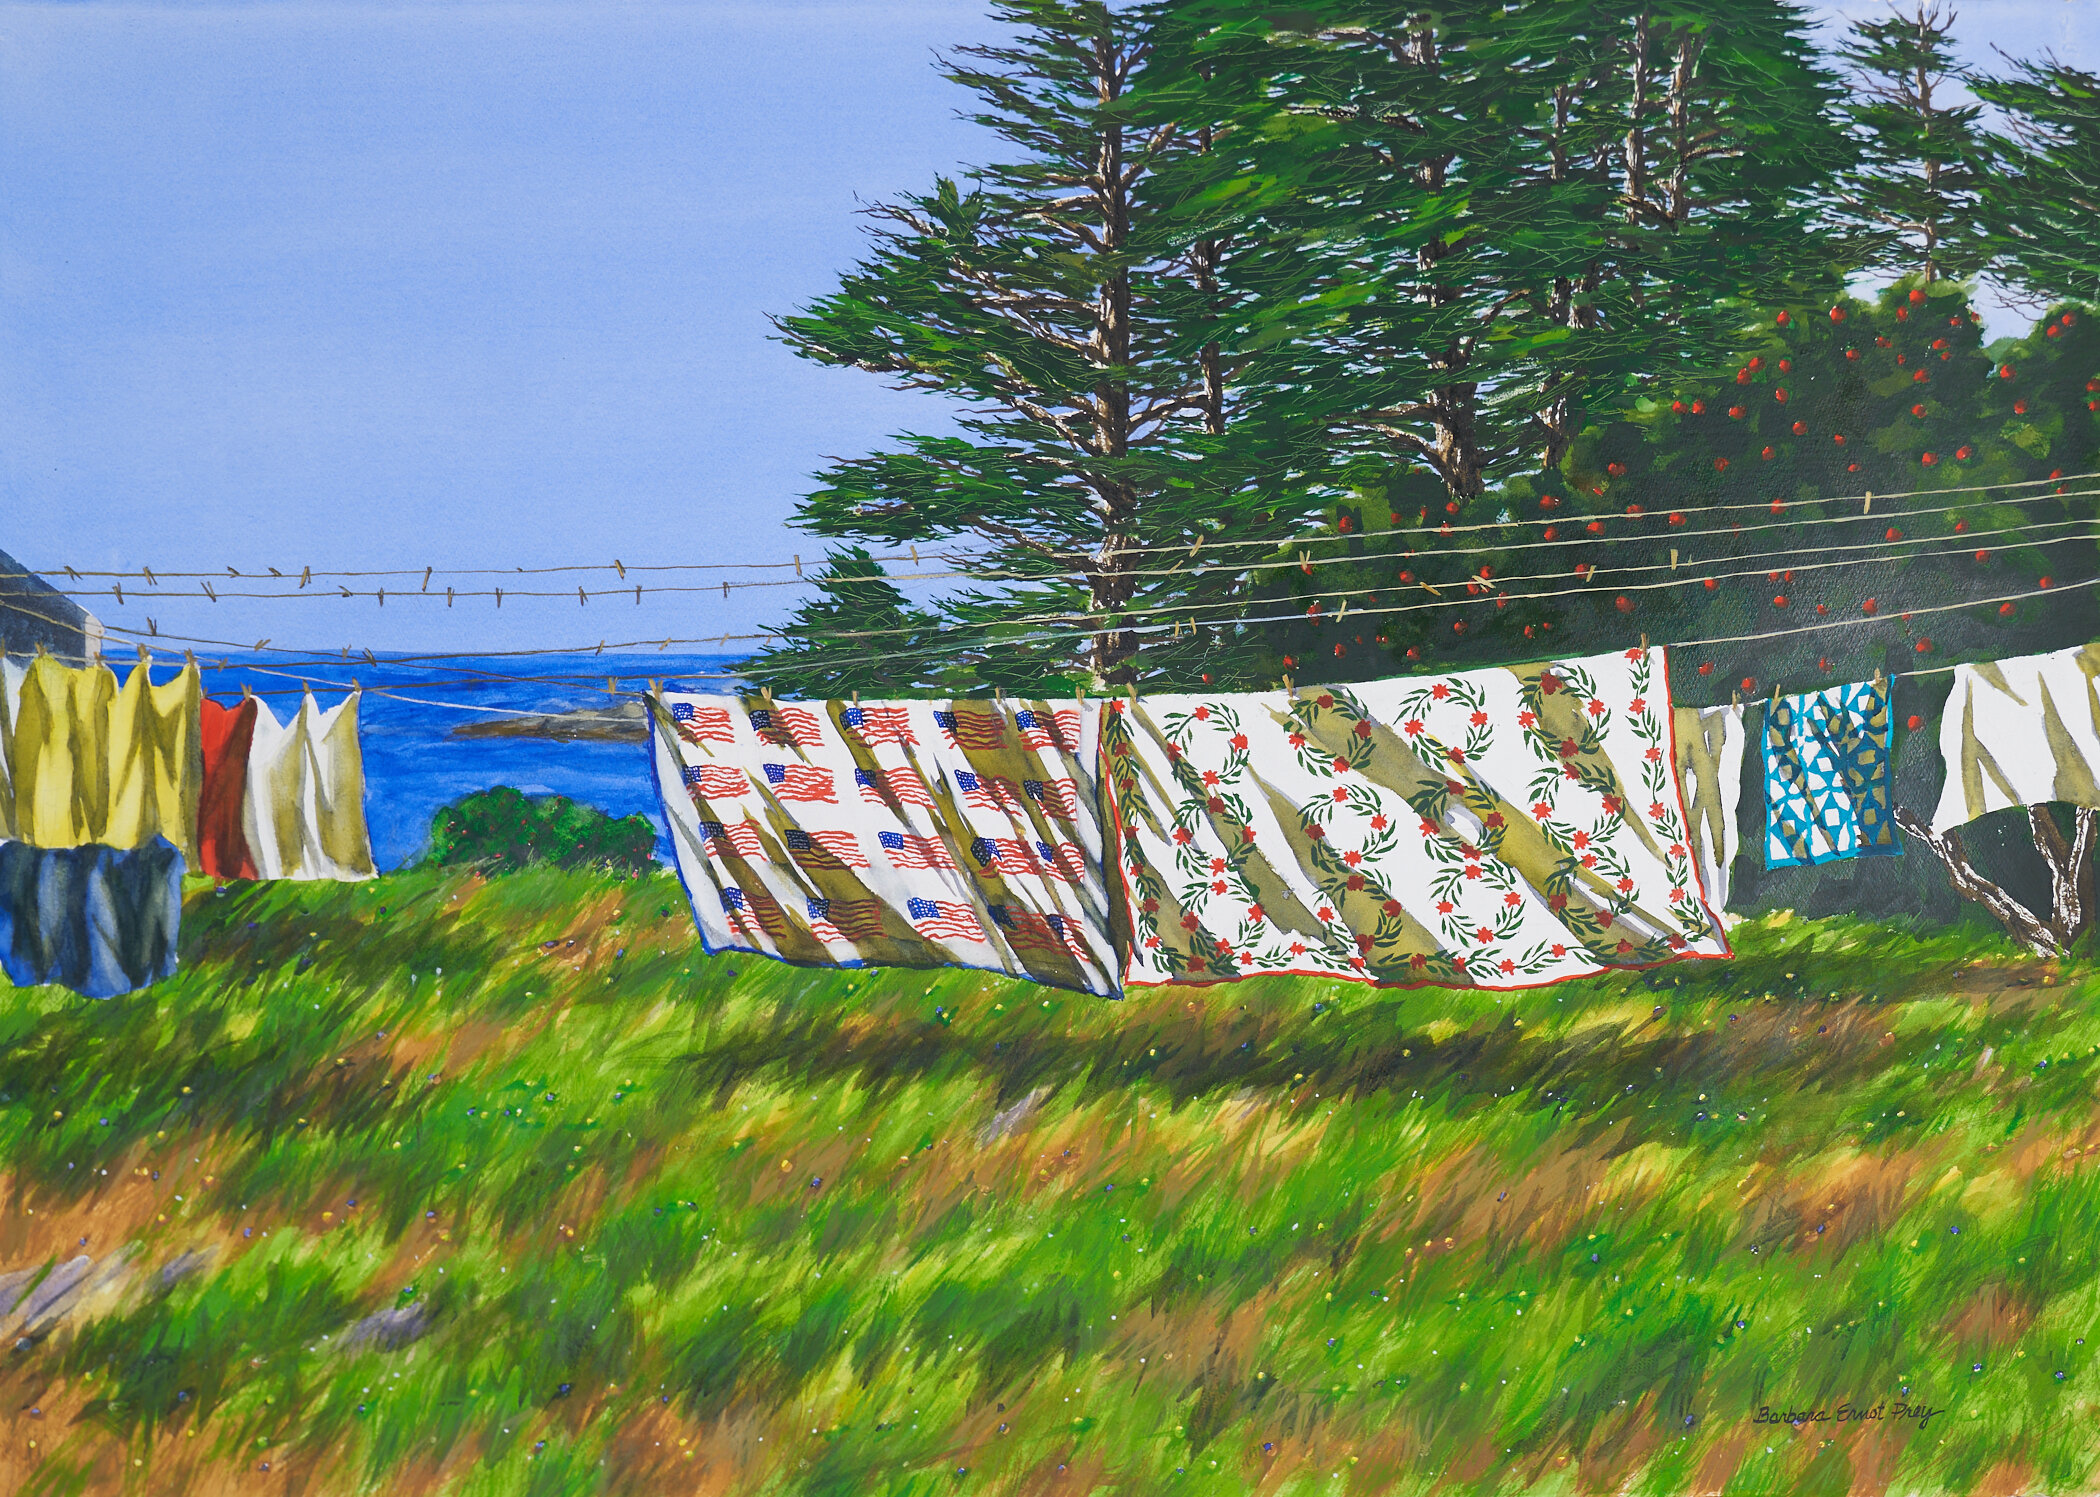 Airing Dry, 2021, Watercolor on paper, 29.75 x 41.25 inches